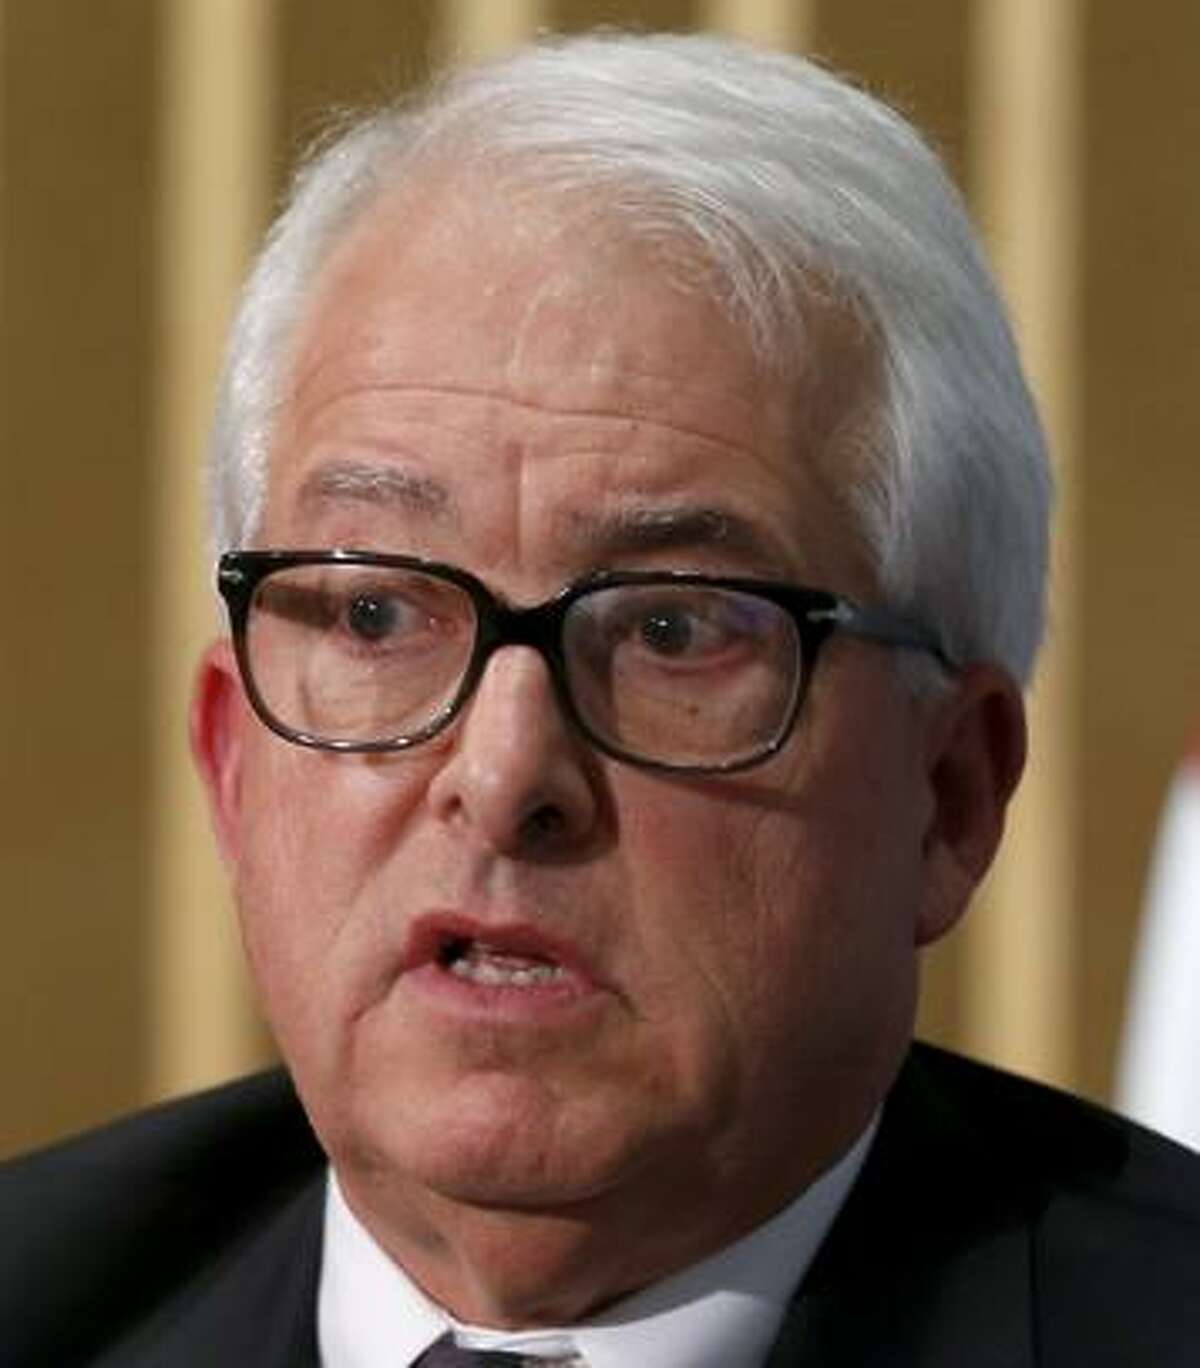 John Cox, a Republican candidate in the California gubernatorial race, meets in conversation with Public Policy Institute of California CEO Mark Baldassare in San Francisco, Calif. on Thursday, Dec. 7, 2017.